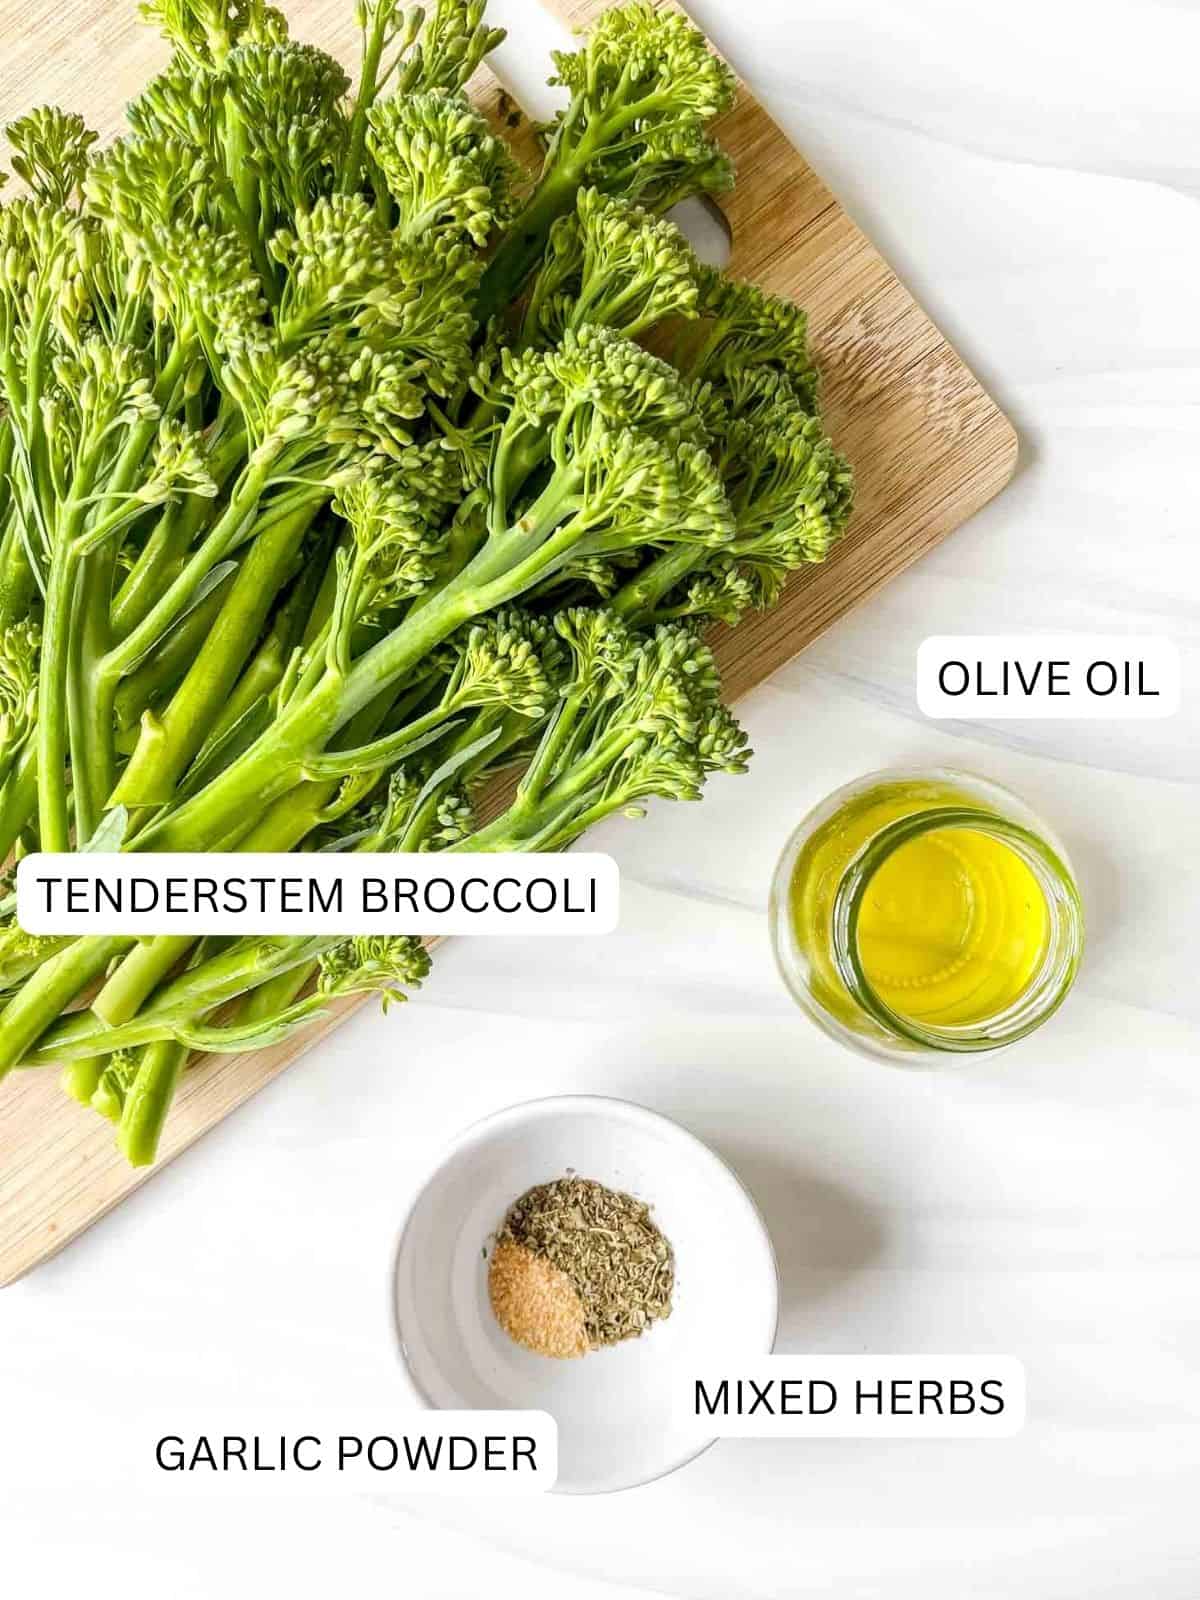 individually labelled tenderstem broccoli on a wooden board, mixed herbs and garlic powder in a white bowl and olive oil in a glass jar.